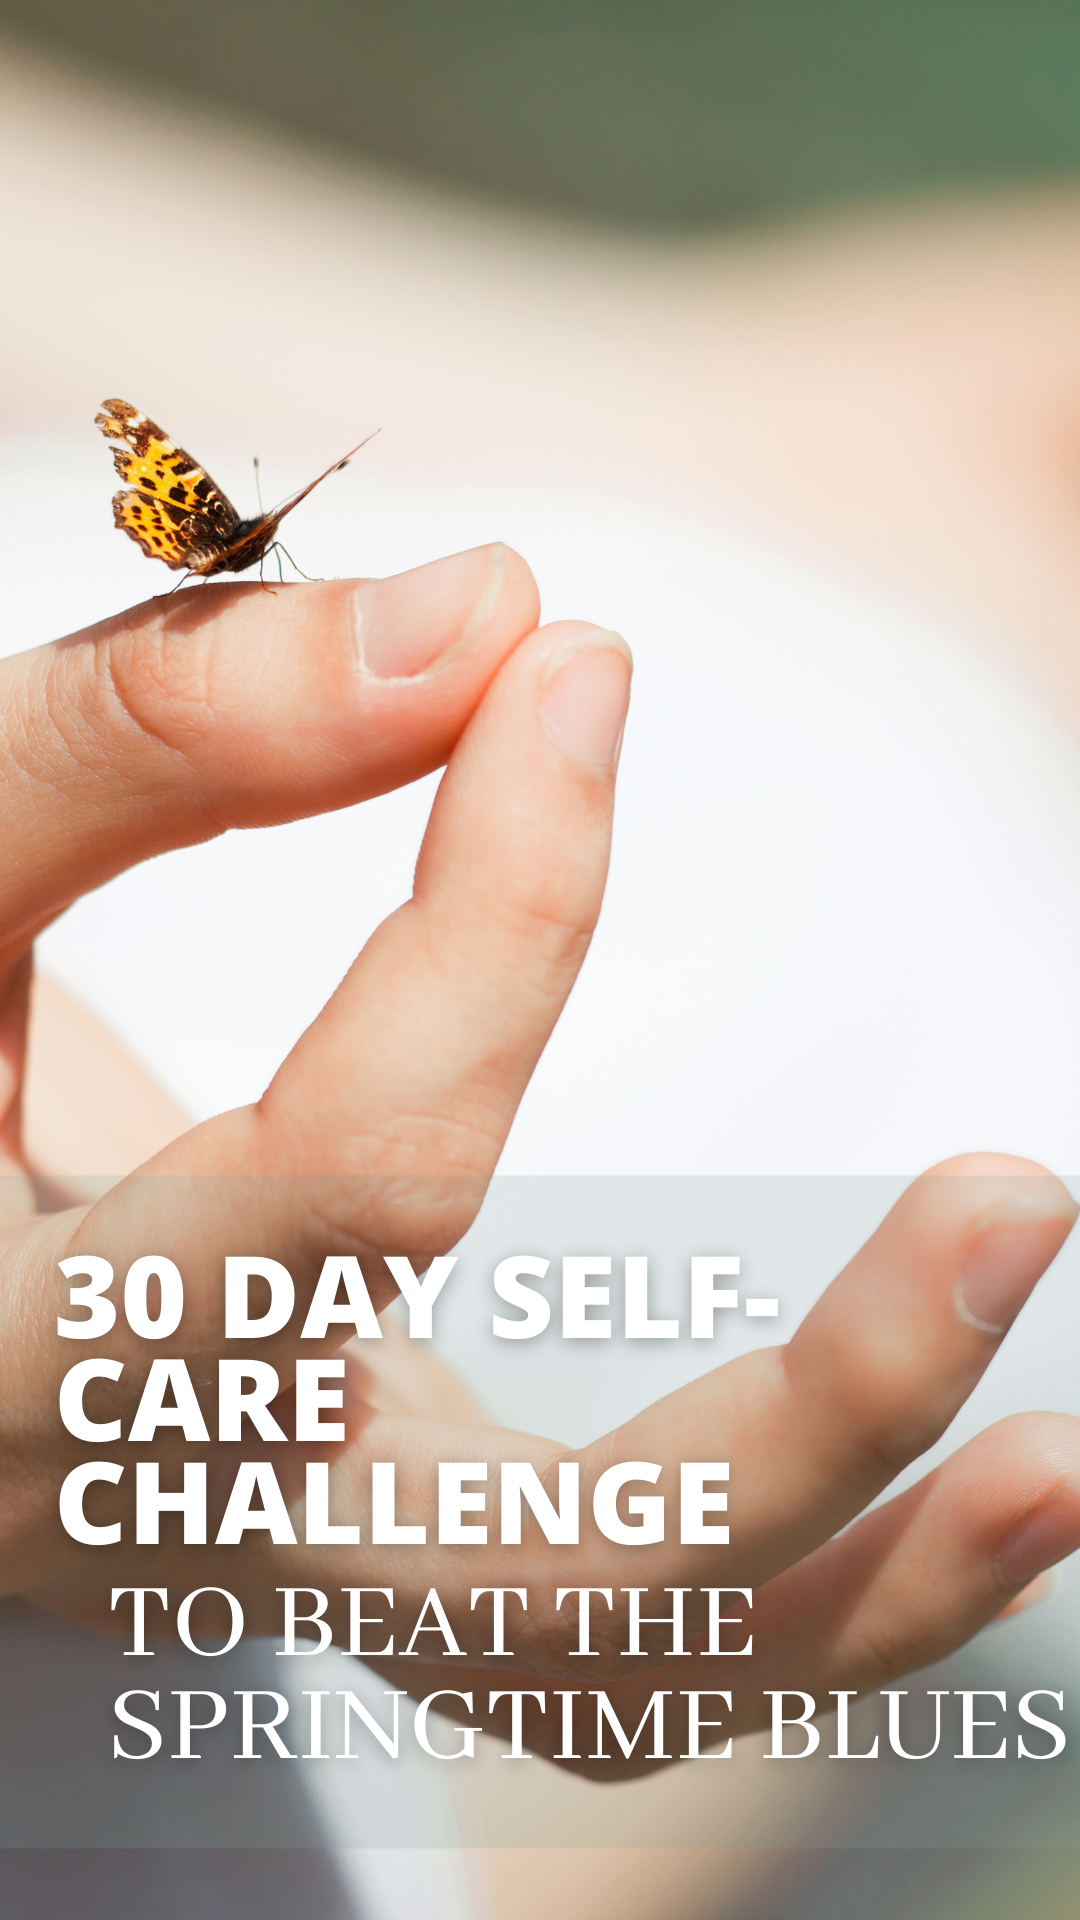 30-Day Self-Care Challenge to Beat that Springtime Blues